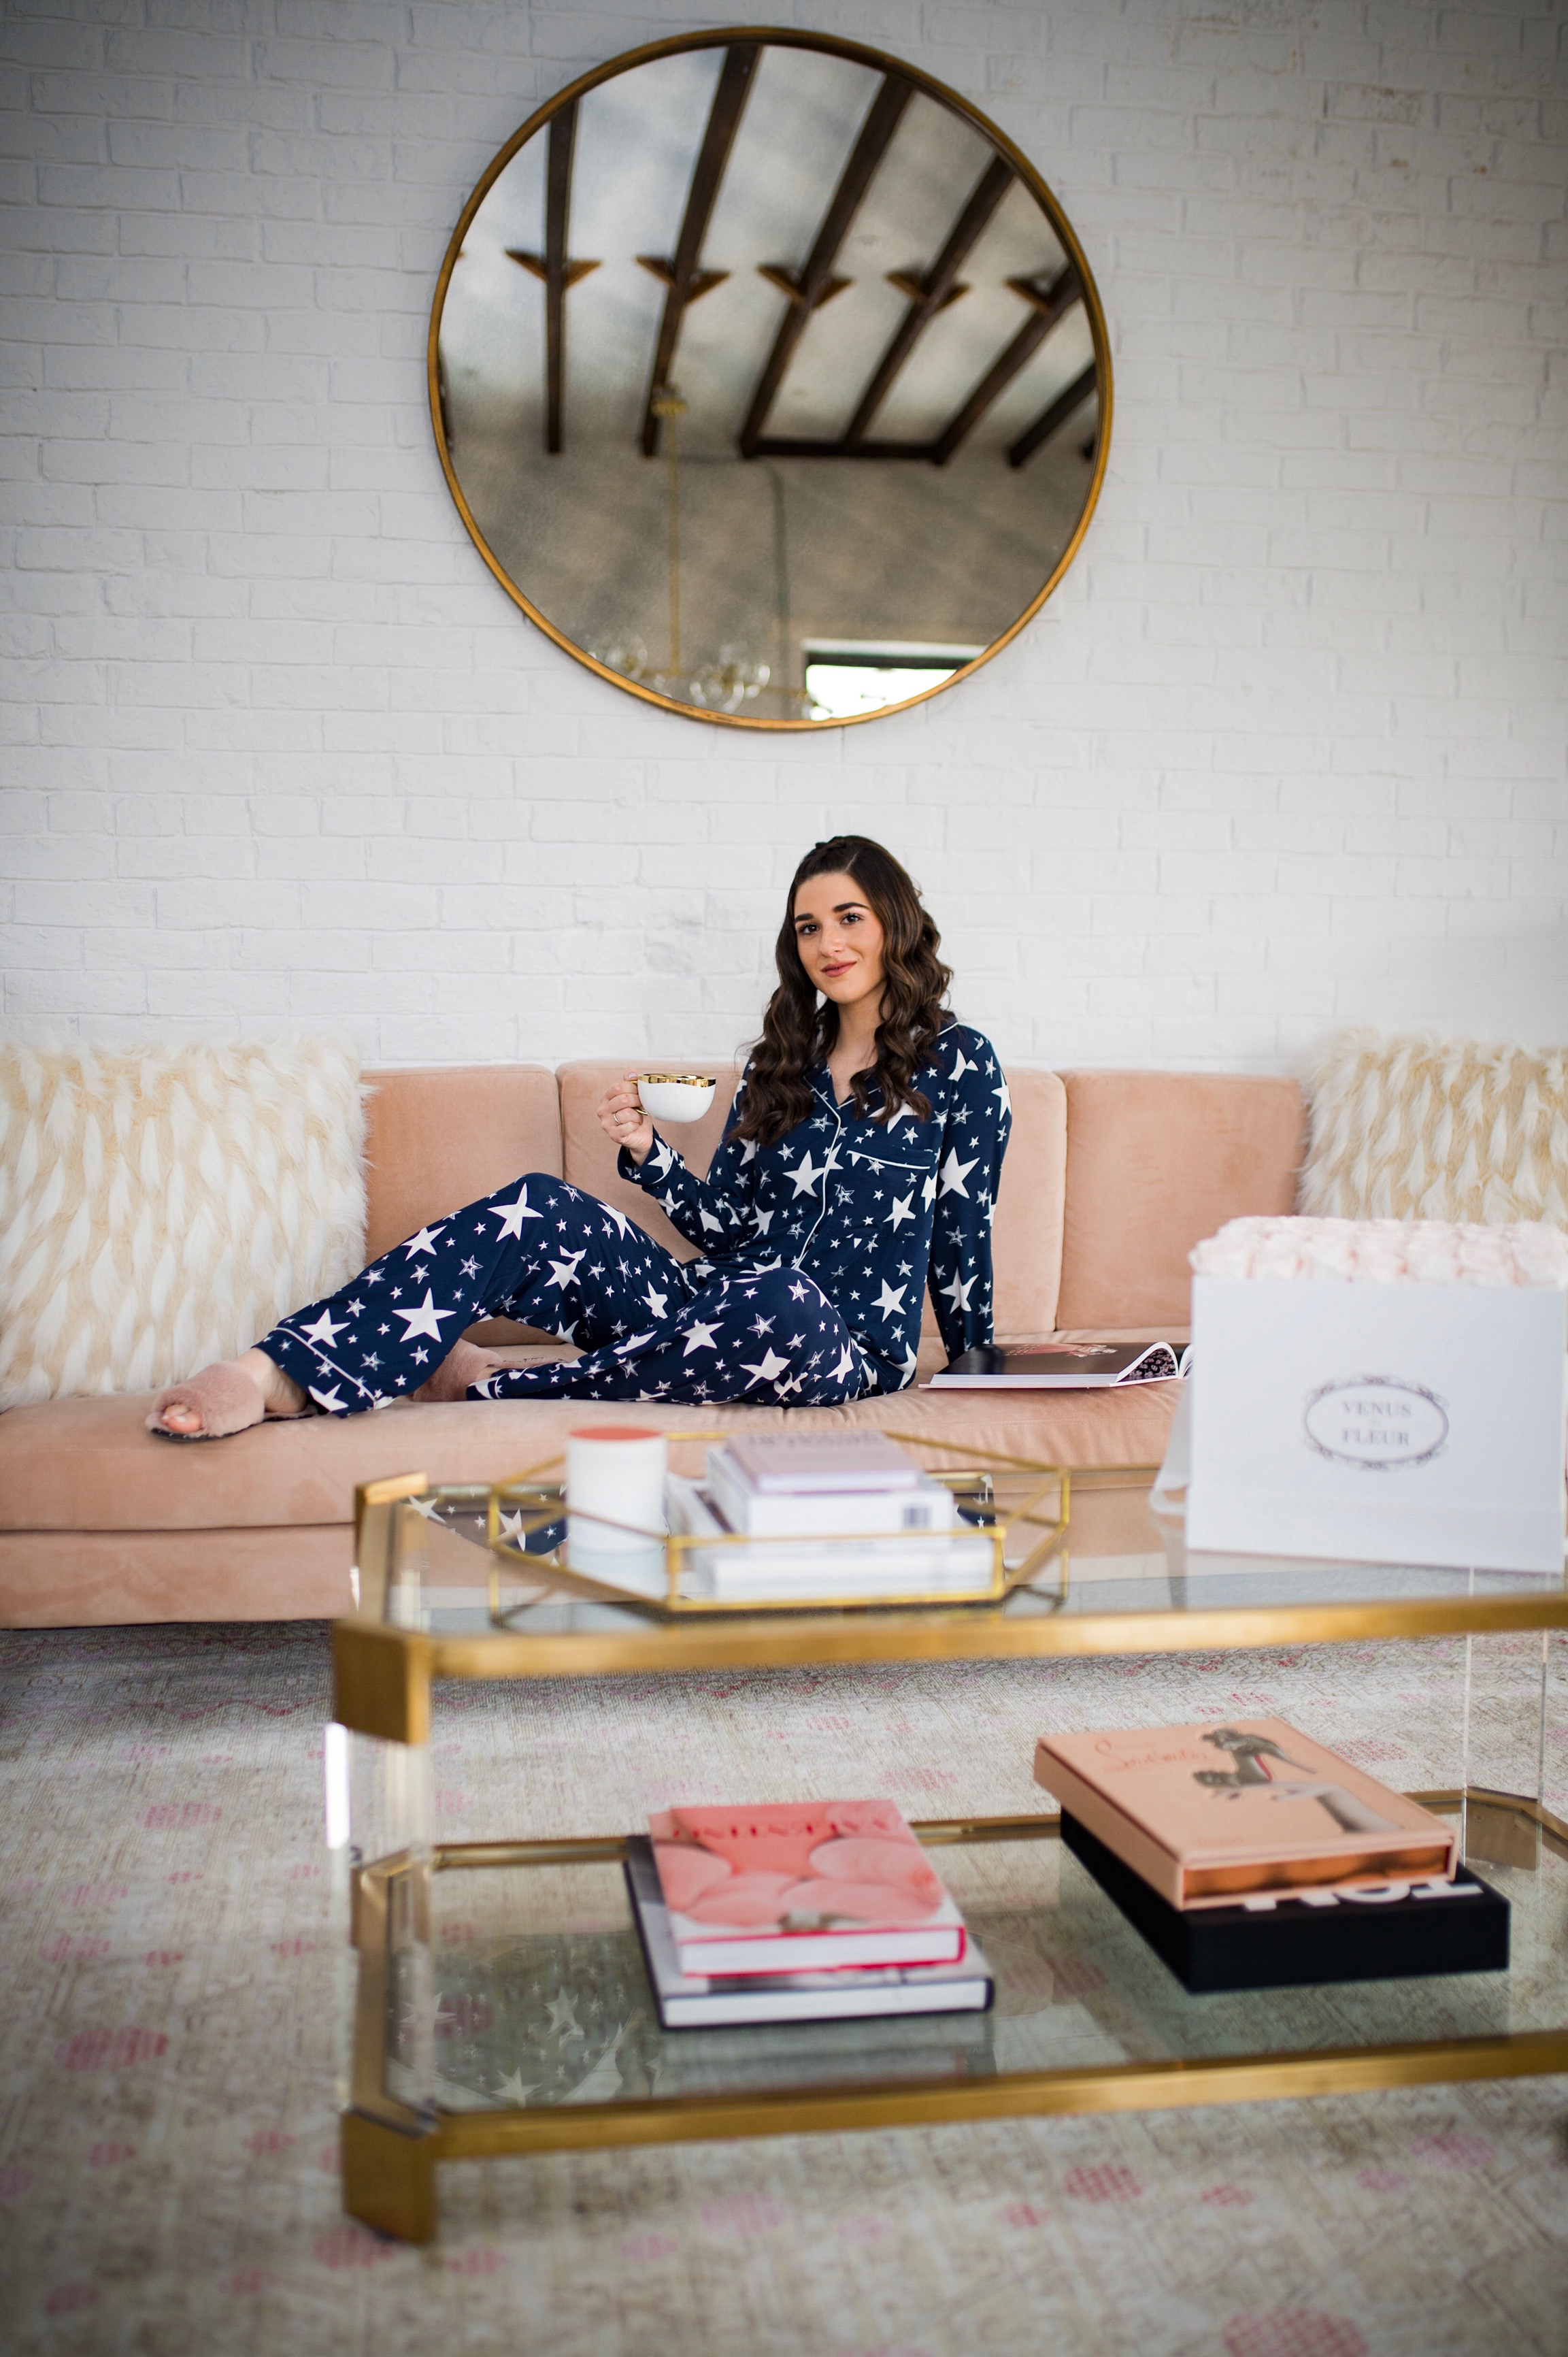 5 Tips For Becoming A Morning Person Navy Star Pajamas Esther Santer Fashion Blog NYC Street Style Blogger Outfit OOTD Trendy Shopping PJs Holiday ASOS Cute Wear Interior Beautiful Home Penthouse Wayfair Circle Mirror Venus Et Fleur Gold Coffee  Table.jpg